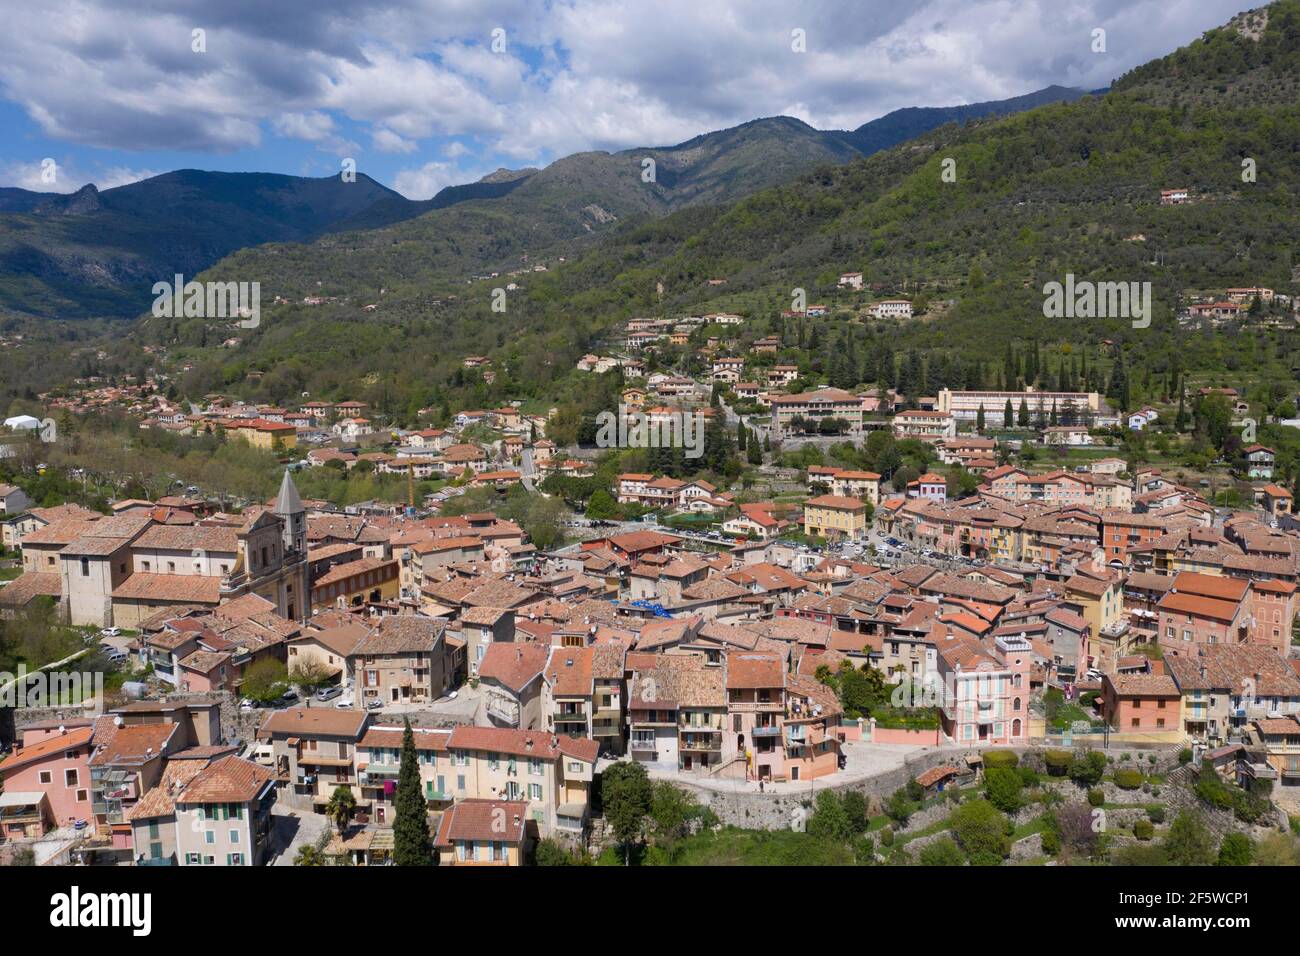 Aerial view of the mountain village of Sospel on the river Bevera at the edge of the Mercantour National Park, Alpes-Maritimes department, Provence Stock Photo